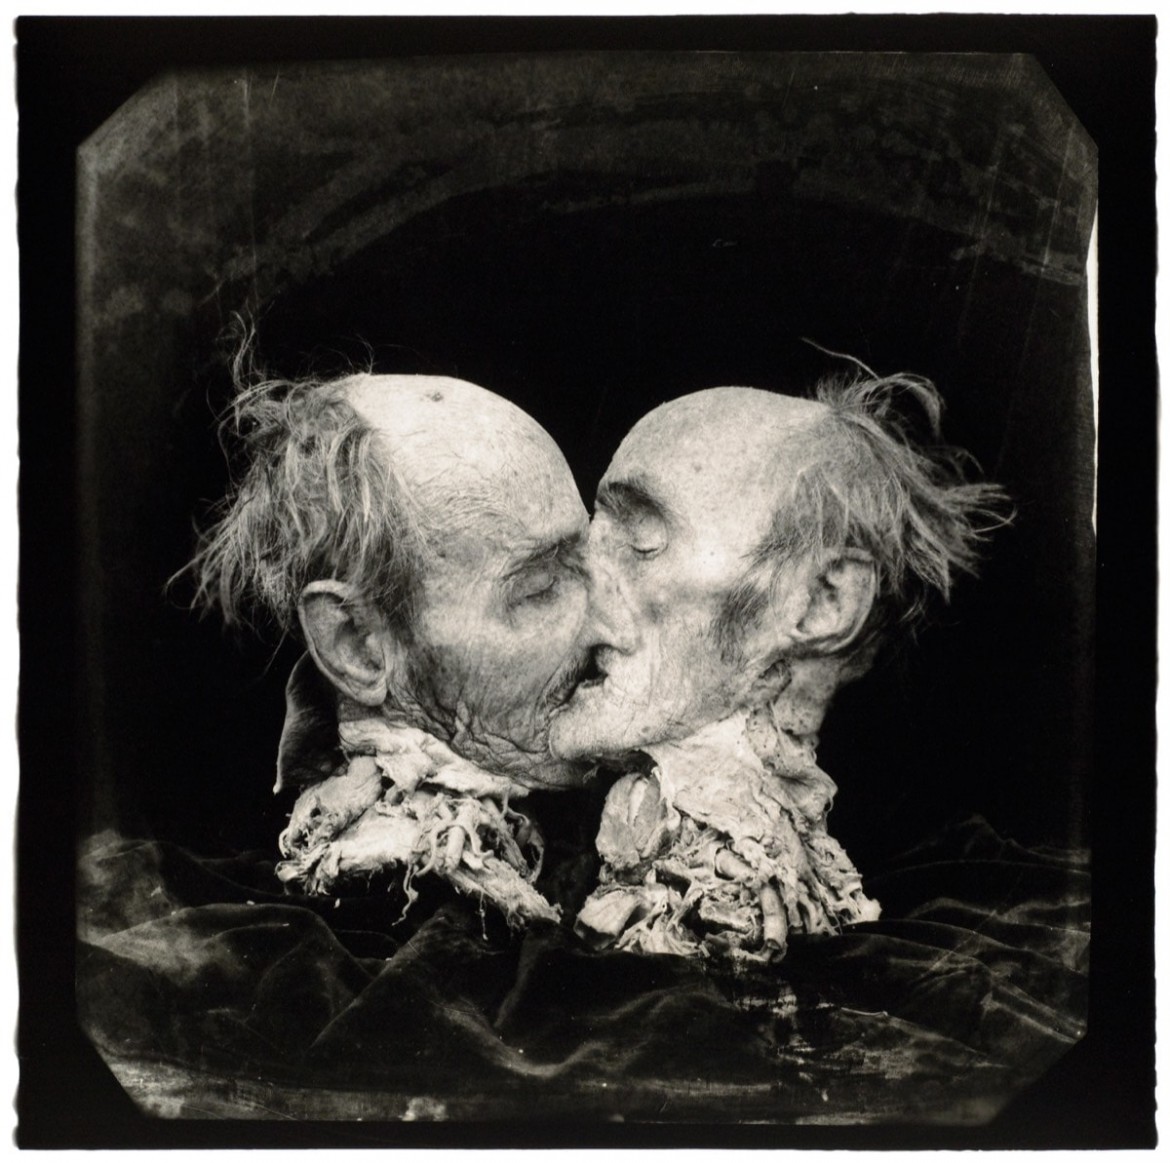 The Kiss -  Joel-Peter Witkin - 1982